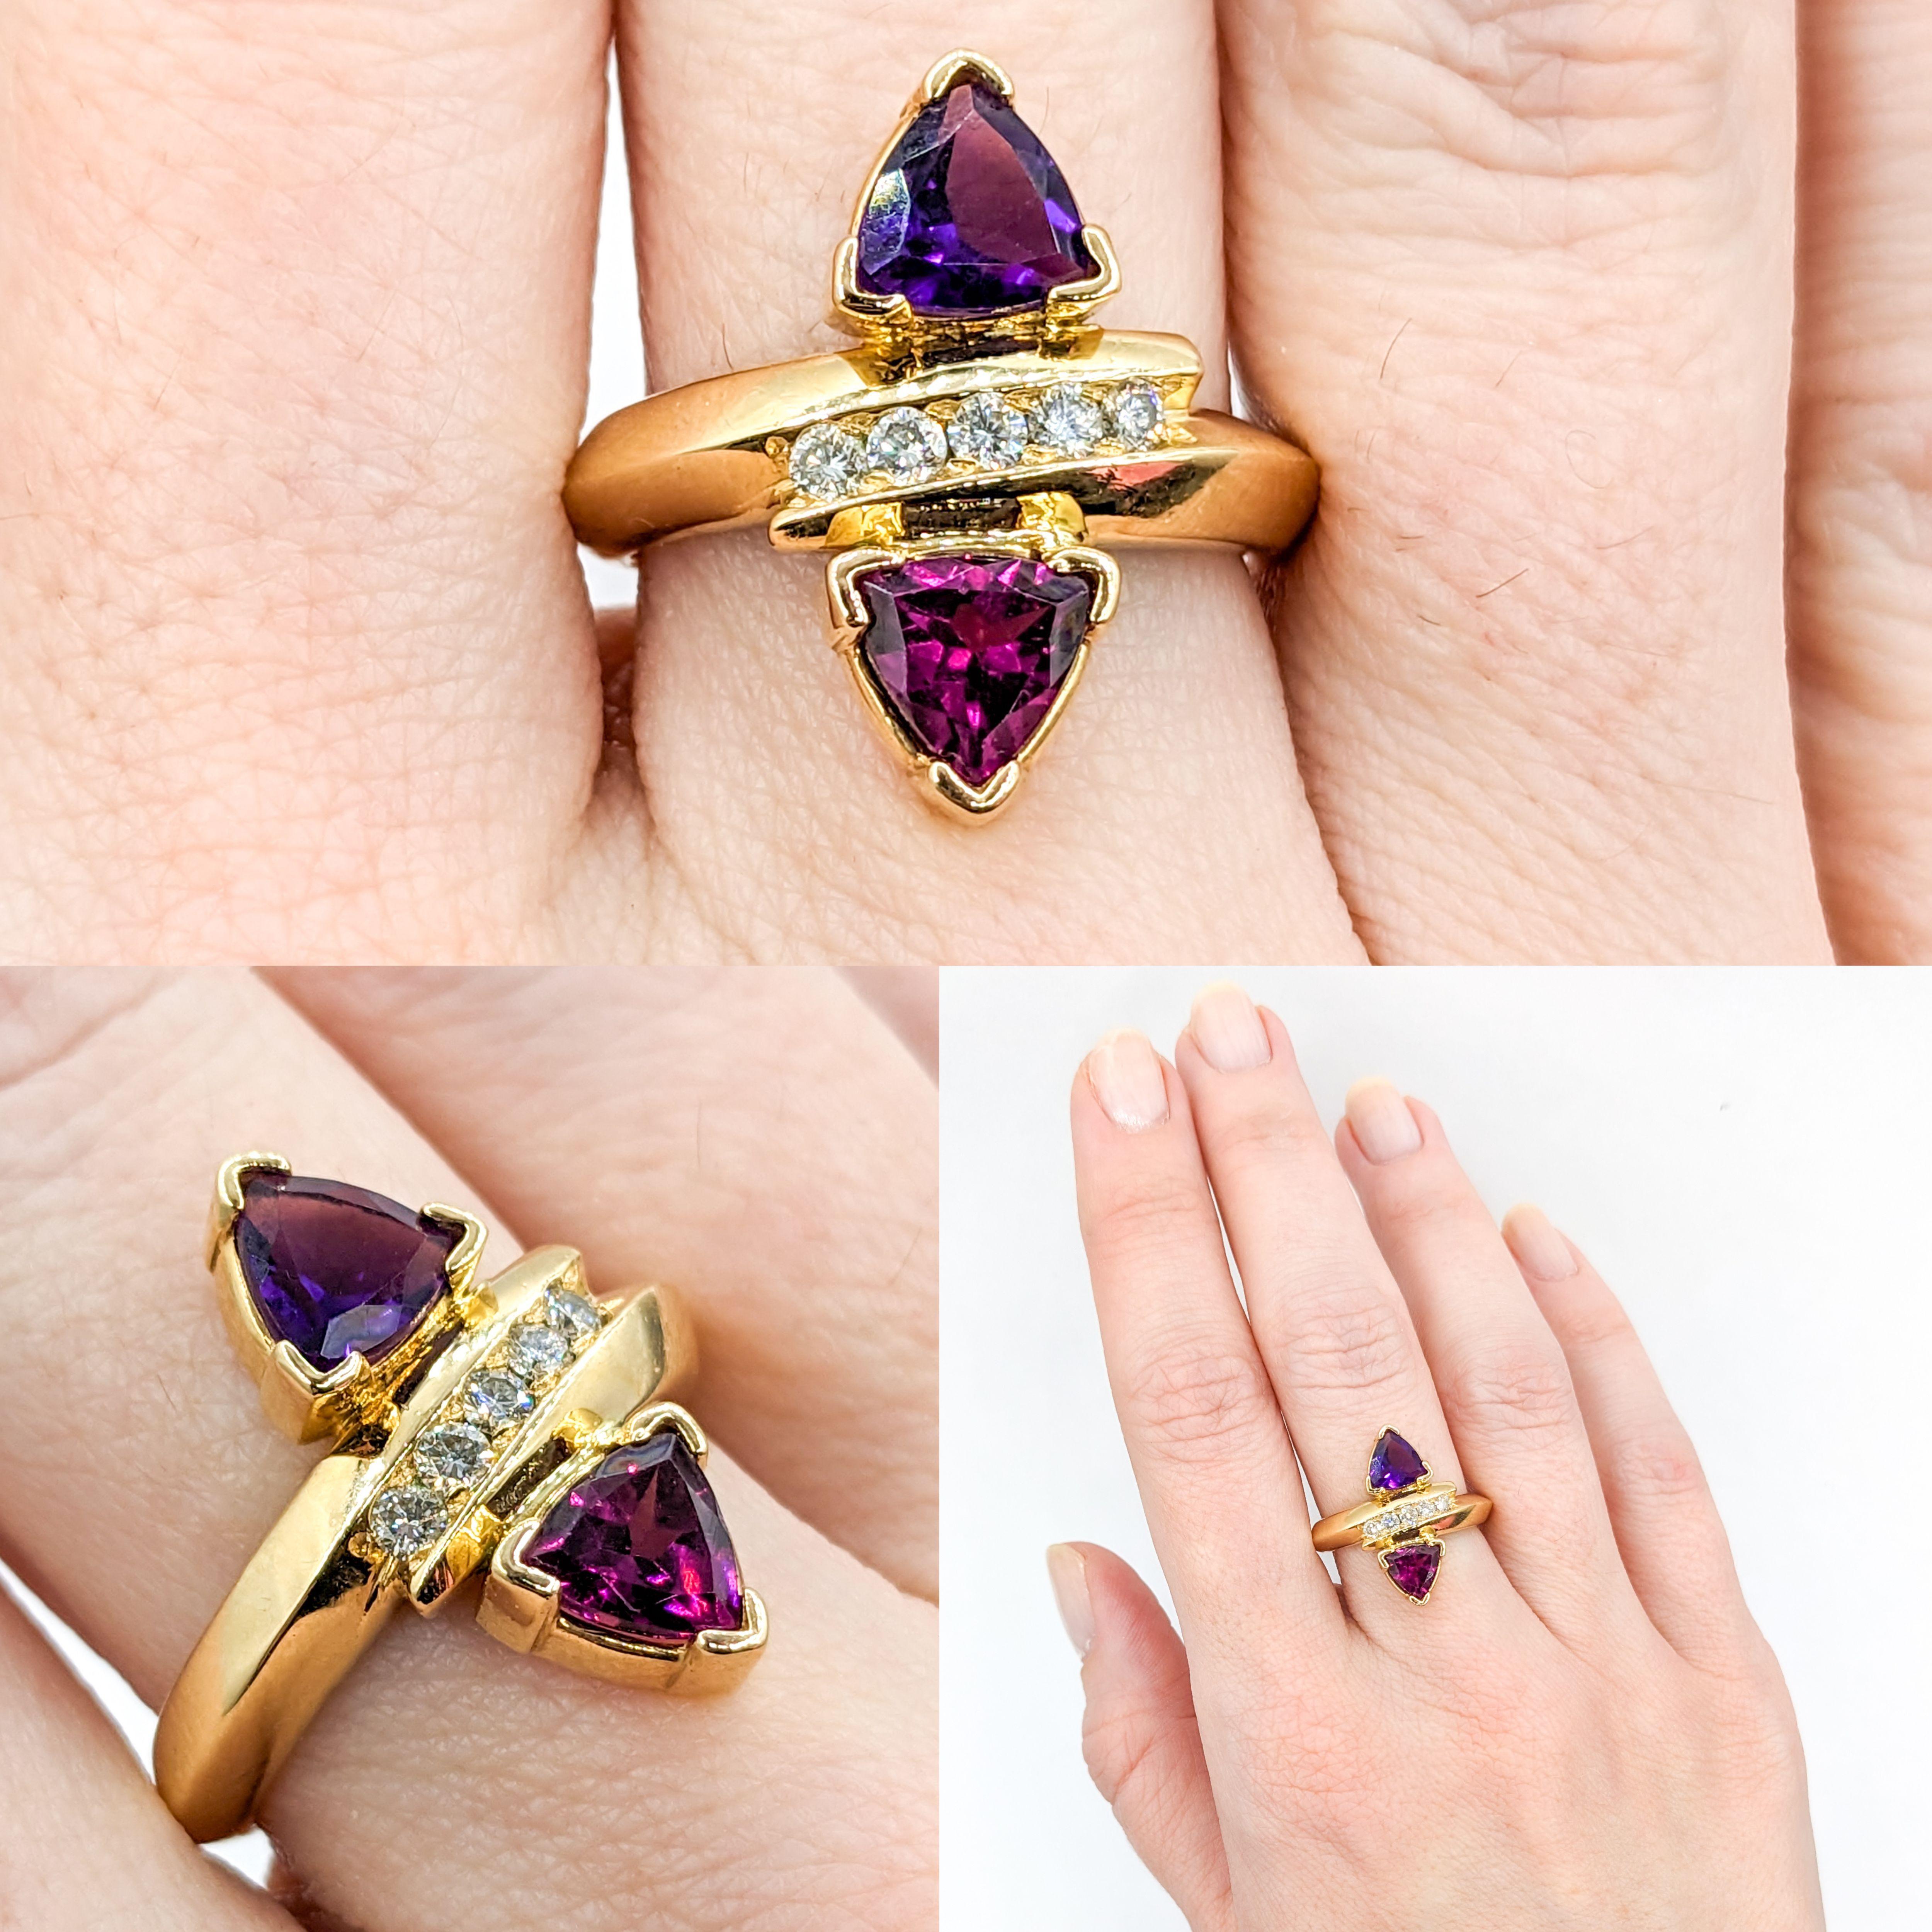 Vintage Trillion Cut Amethyst, Garnet, & Diamond Ring in Gold

This exquisite Amethyst and Garnet ring boasts a stunning pair of 6mm Trillion cut stones. The amethyst is a bright purple and the garnet is pink in color. In addition to the lovely